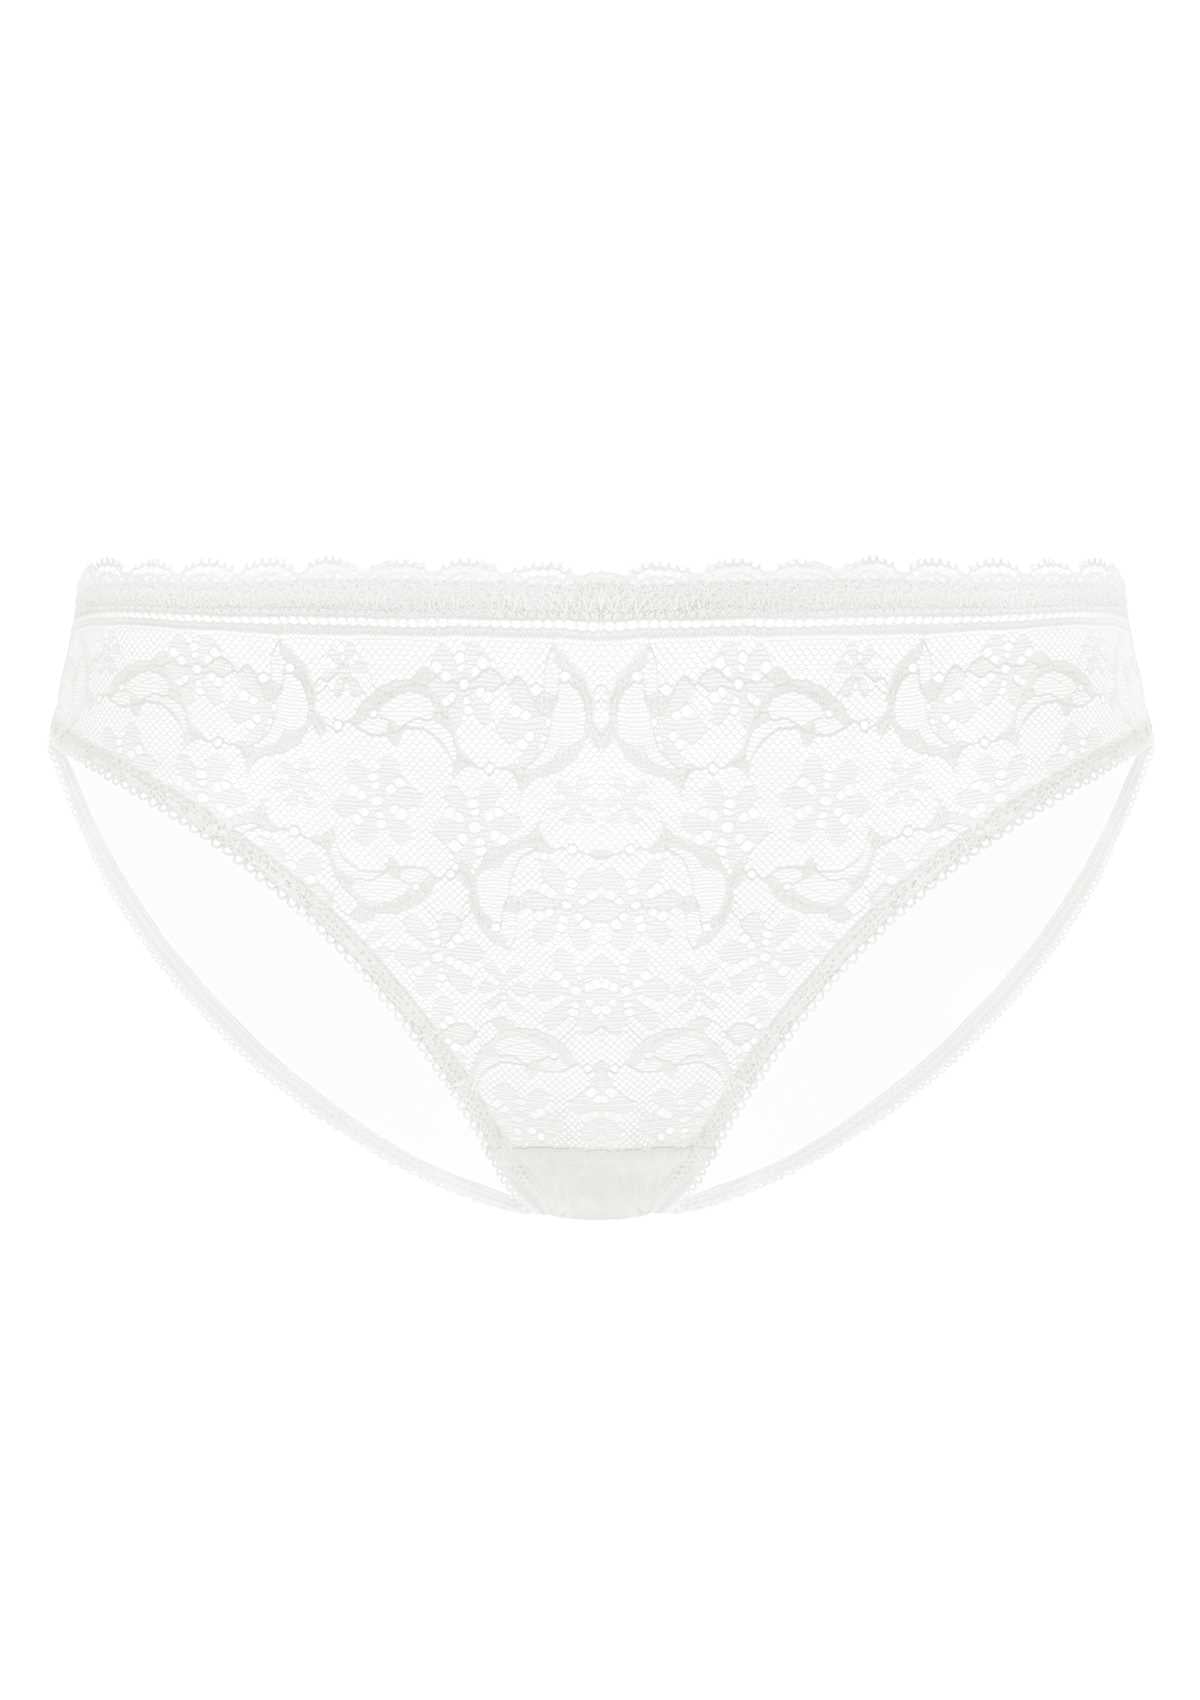 HSIA Anemone Lace Dolphin-Patterned Front And Mesh Back Panties-3 Pack - XXL / Black+Burgundy+White